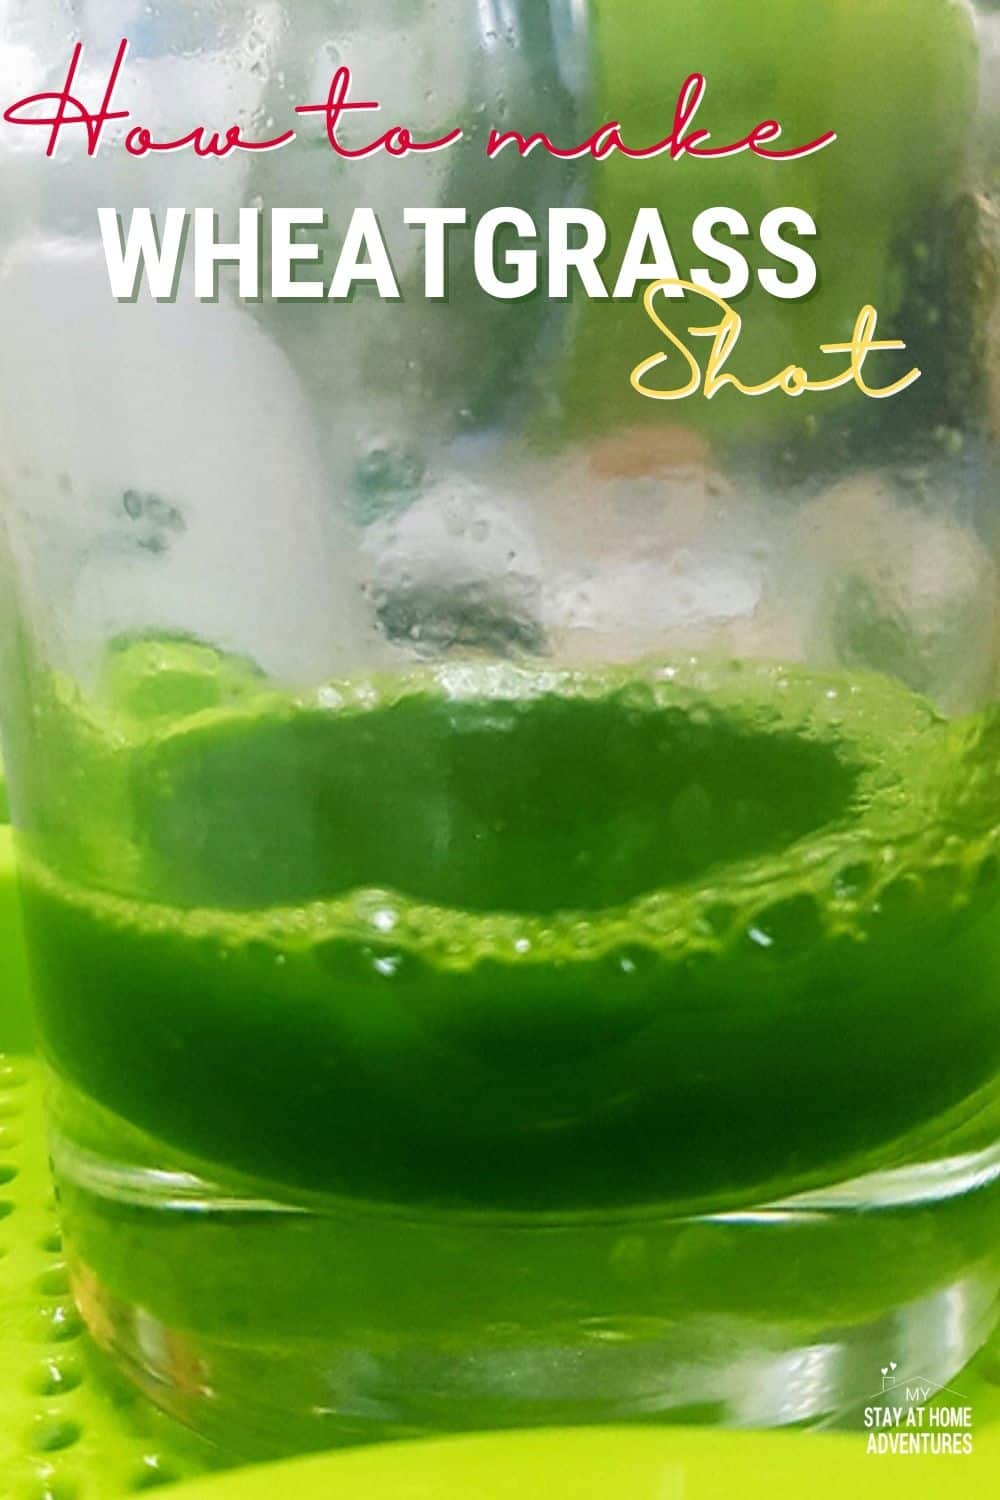 Growing wheatgrass is popular for its juice because of the health benefits from it. We’ll talk about How to Grow Wheatgrass in your Home, and a bit more. via @mystayathome